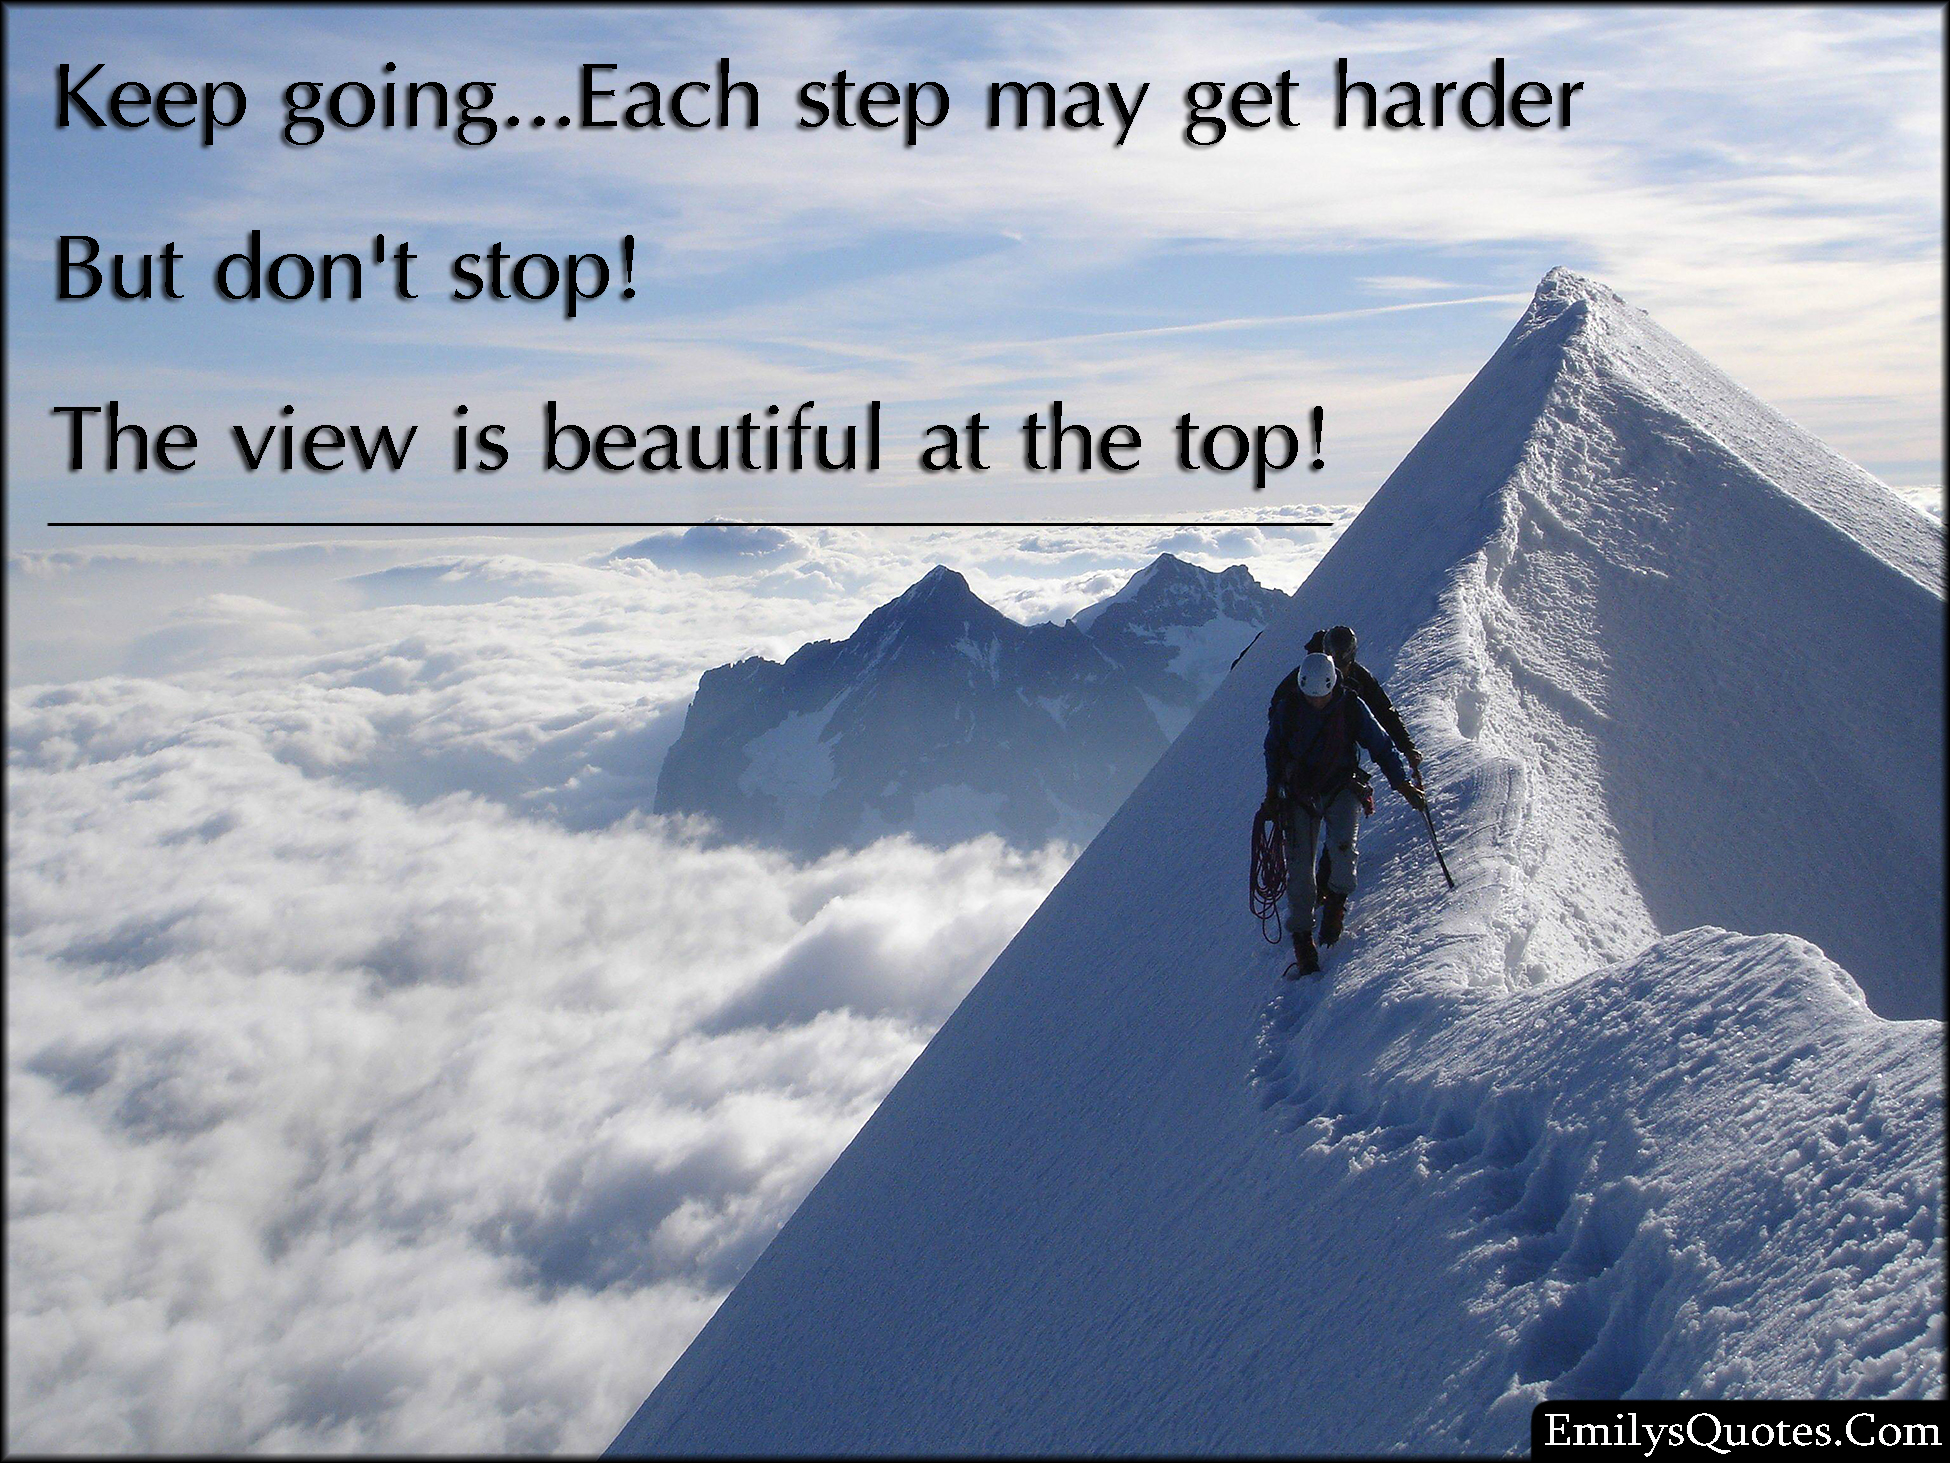 Keep going…Each step may get harder But don’t stop! The view is beautiful at the top!